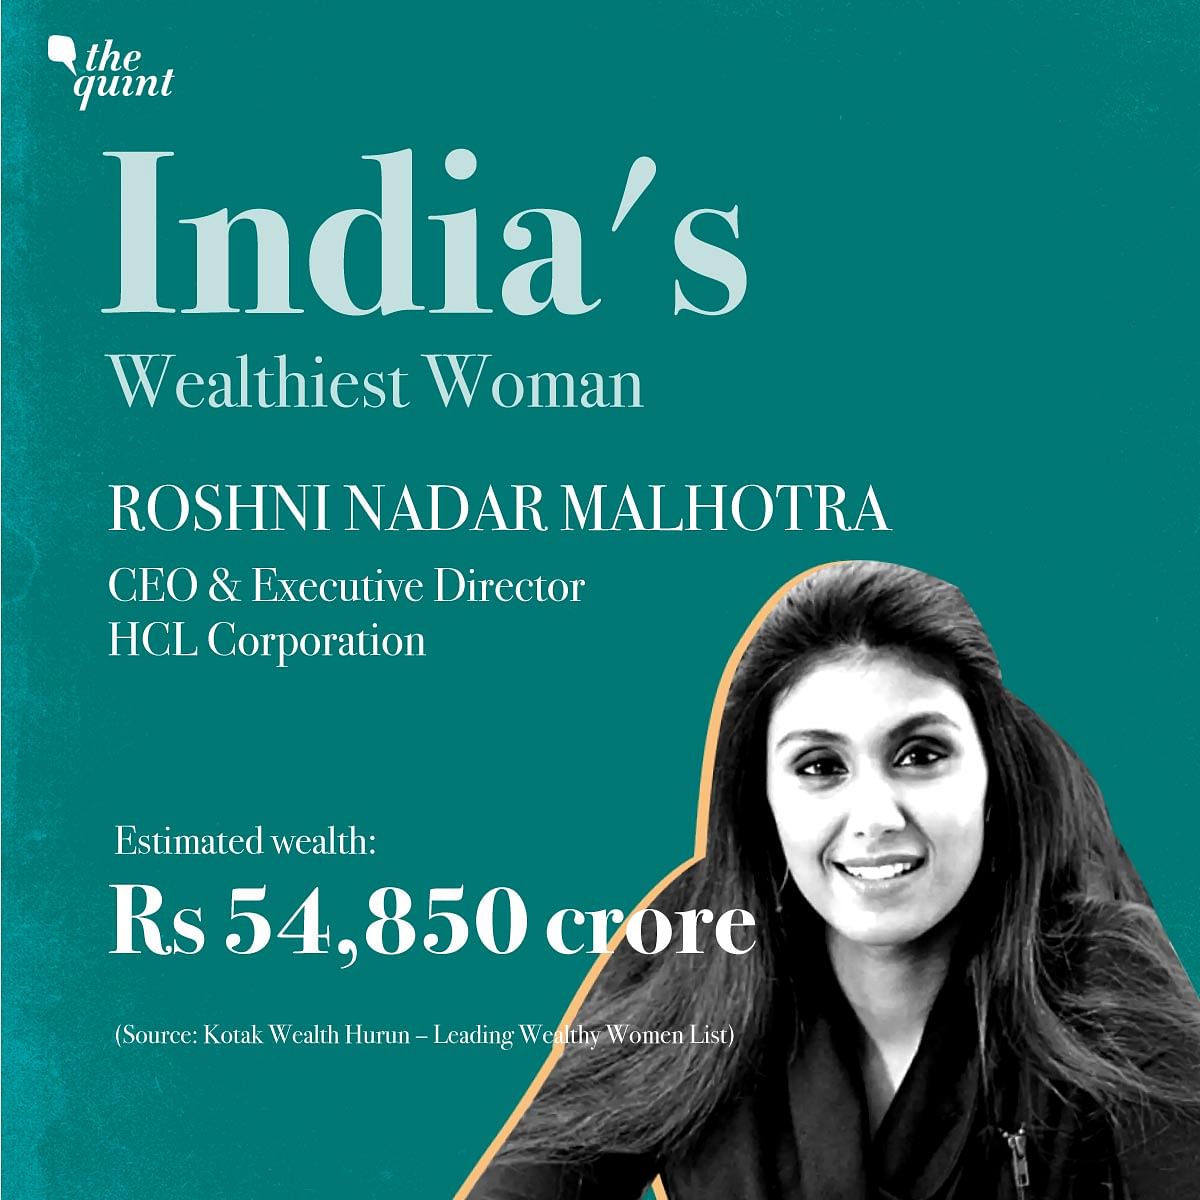 The average wealth of women on this list is about Rs 2,725 crore and the threshold for the ranking is Rs 100 crore.